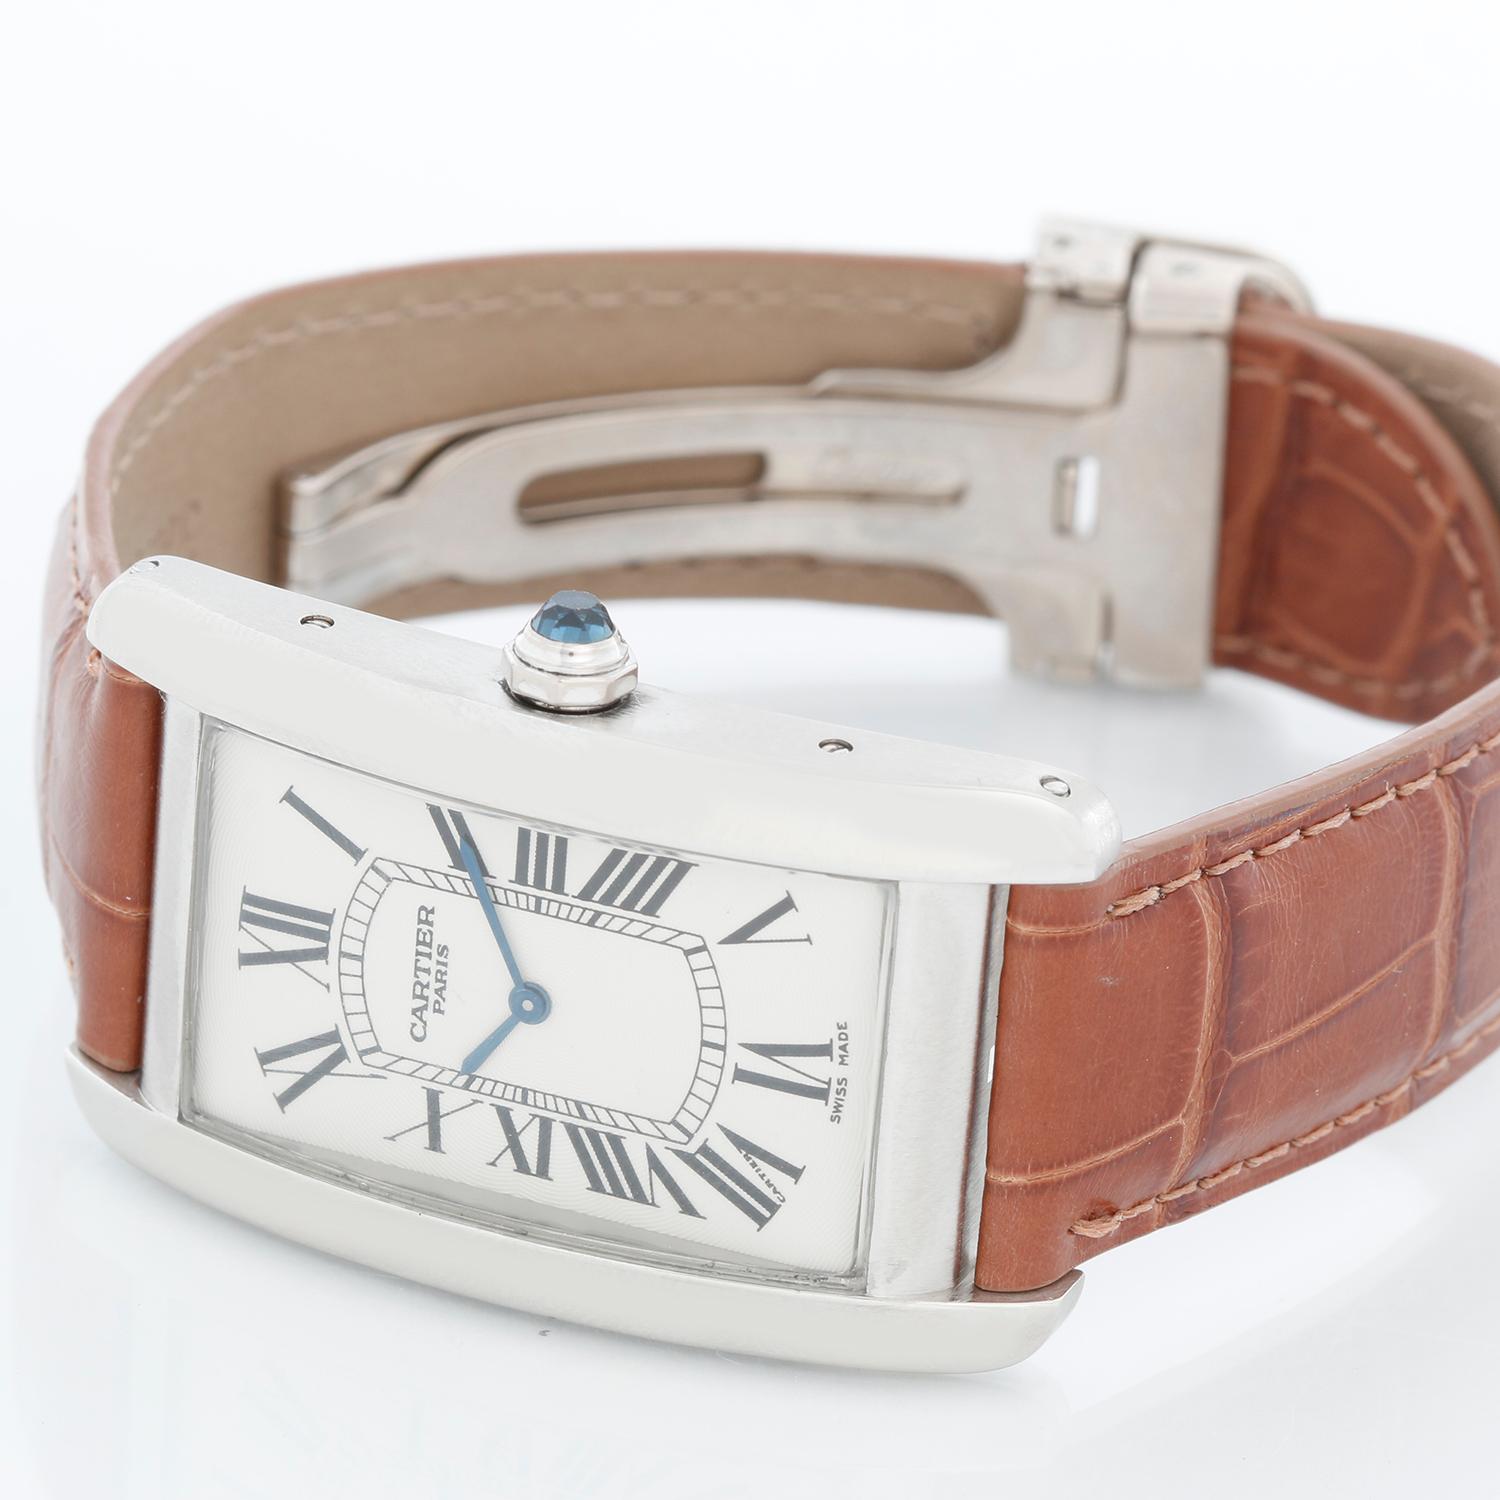 Cartier Tank Americaine (or American) Large  Men's Platinum Watch Ref 1734 - Manual winding. Platinum rectangular style case (44 mm x 27 mm). Silver dial with black Roman numerals. Strap band with 18k white gold Cartier deployant buckle. Pre-owned